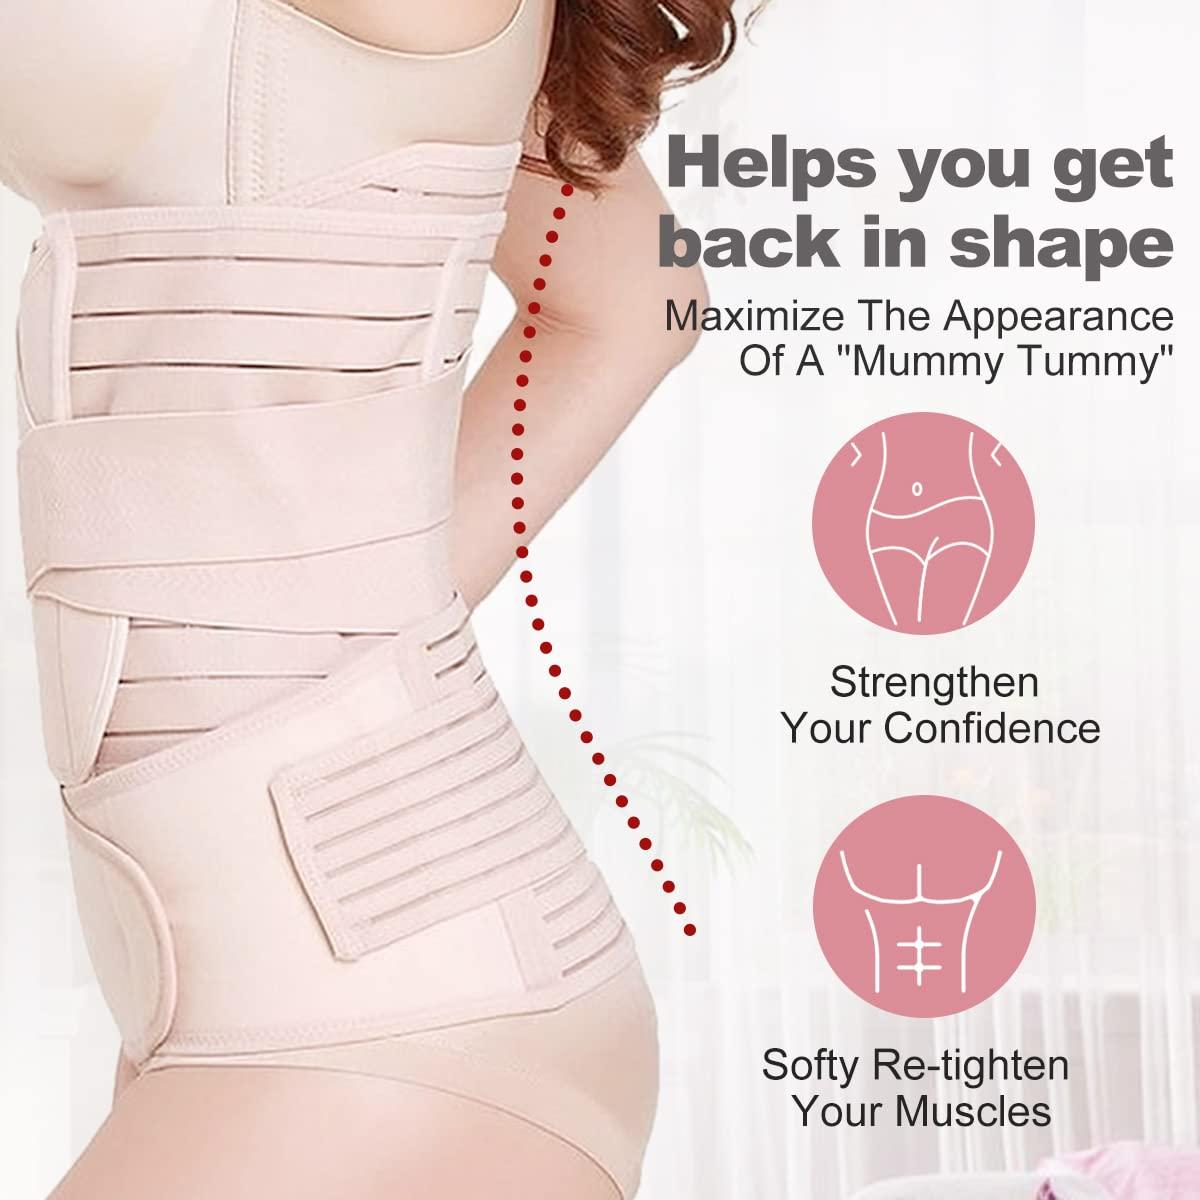 3 In 1 Postpartum Belly Band Wrap - Abdominal Binder Post Surgery